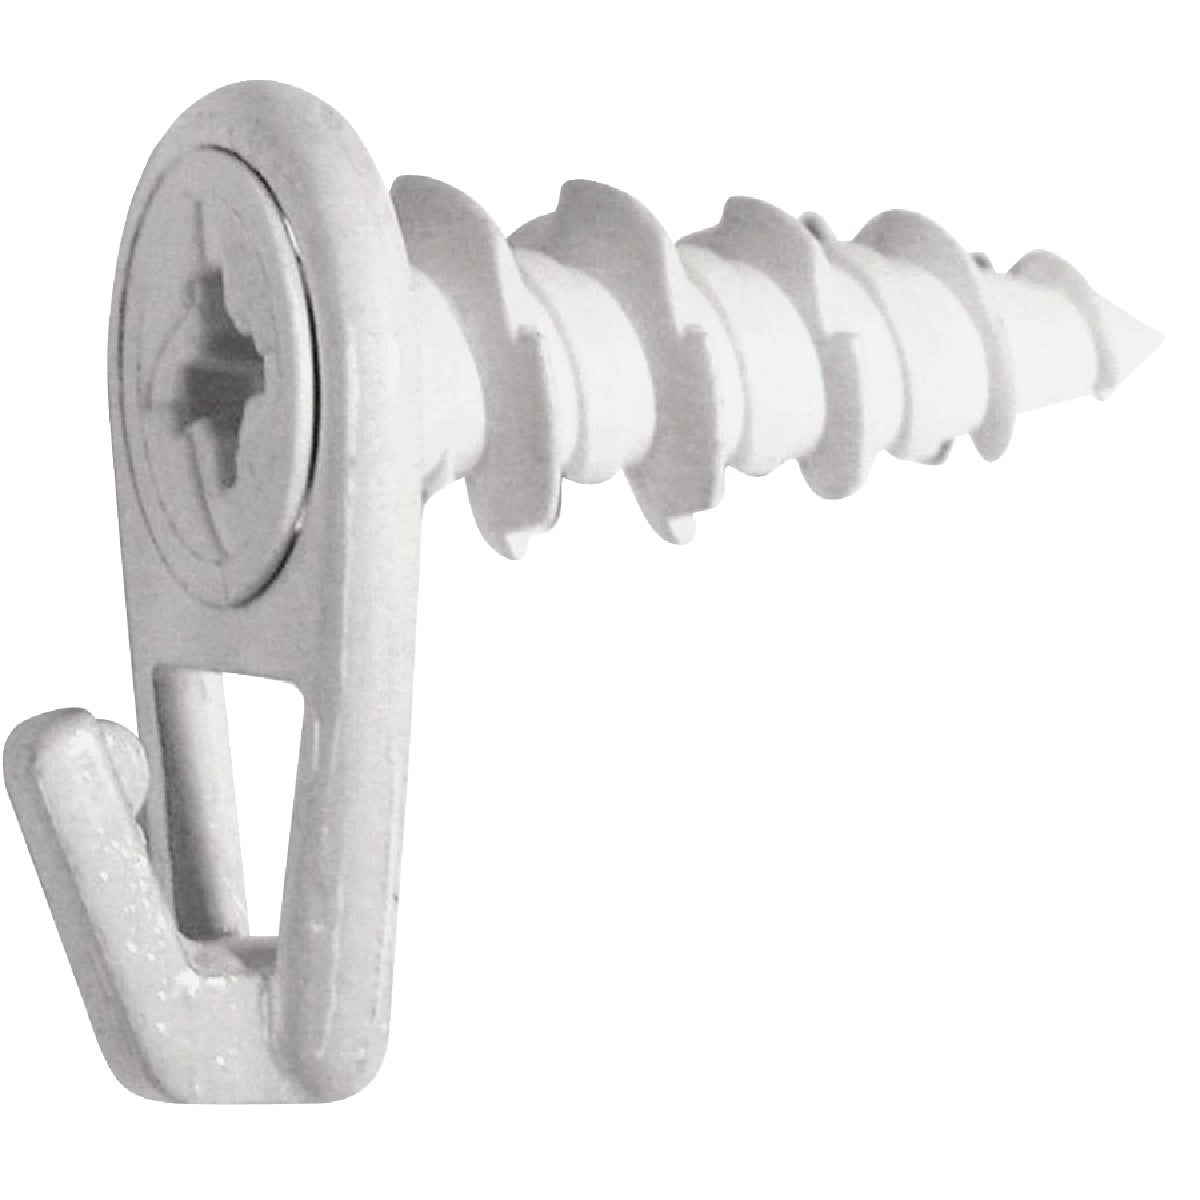 Hillman Anchor Wire 50 Lb. Capacity White Self-Drilling Wall Driller Picture Hanger (2 Count)